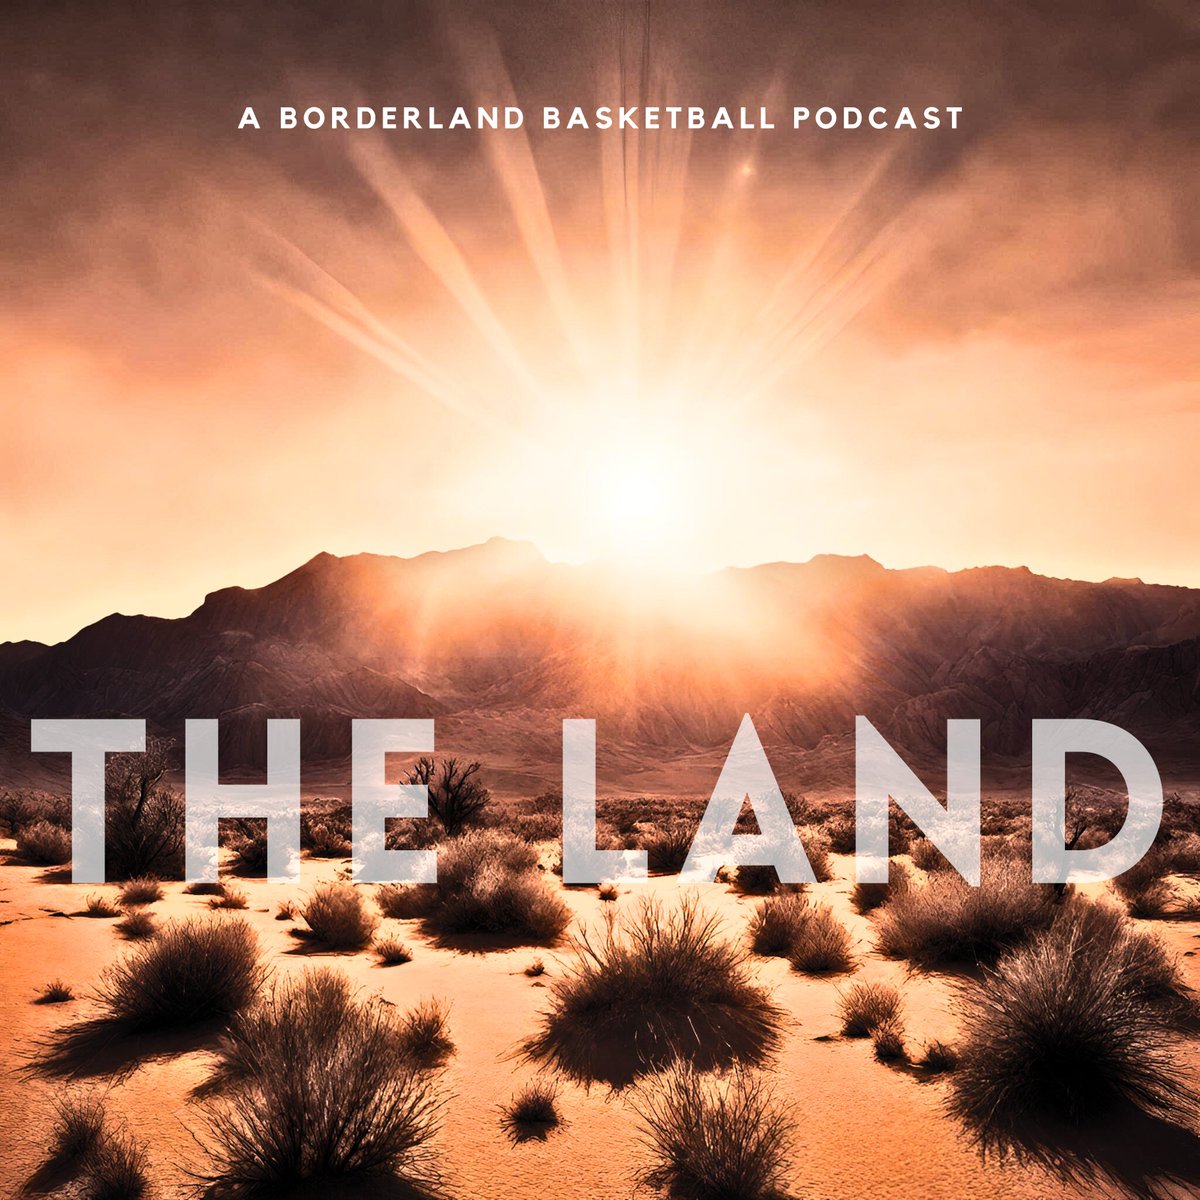 I am excited to announce my new project!

THE LAND: A Borderland Basketball Podcast

🧵Here is what listeners can expect🧵

#TXHSBB #NMHSBB #ElPaso #LasCruces